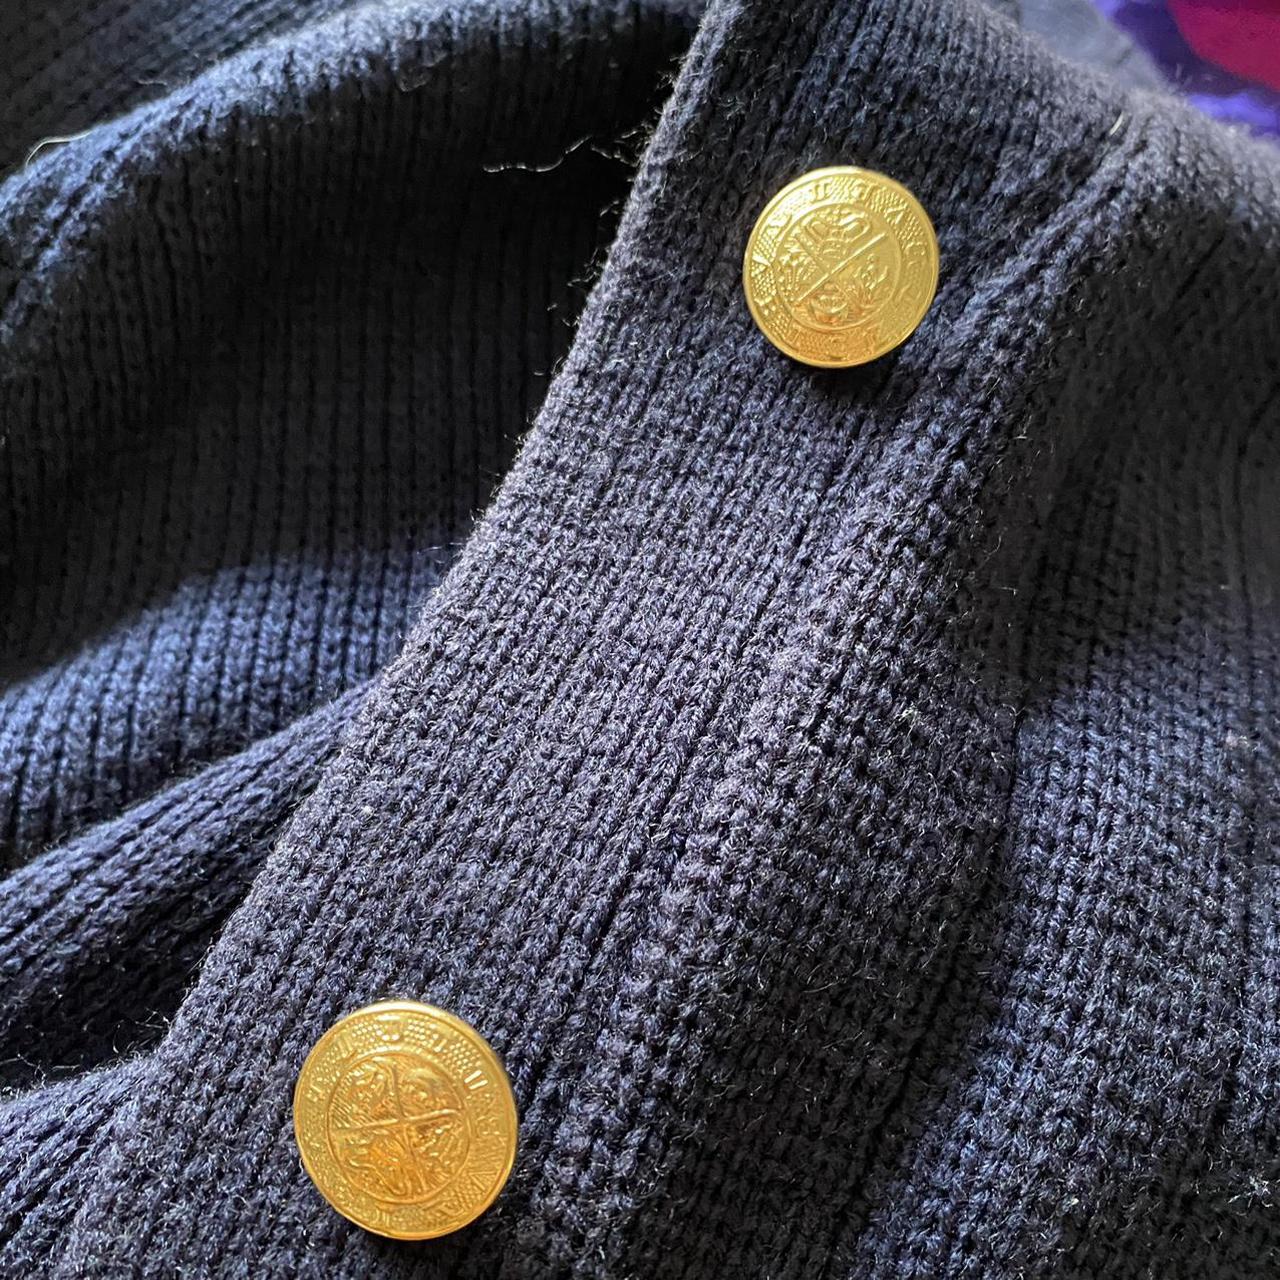 Product Image 3 - Navy collared cardigan sweater. The